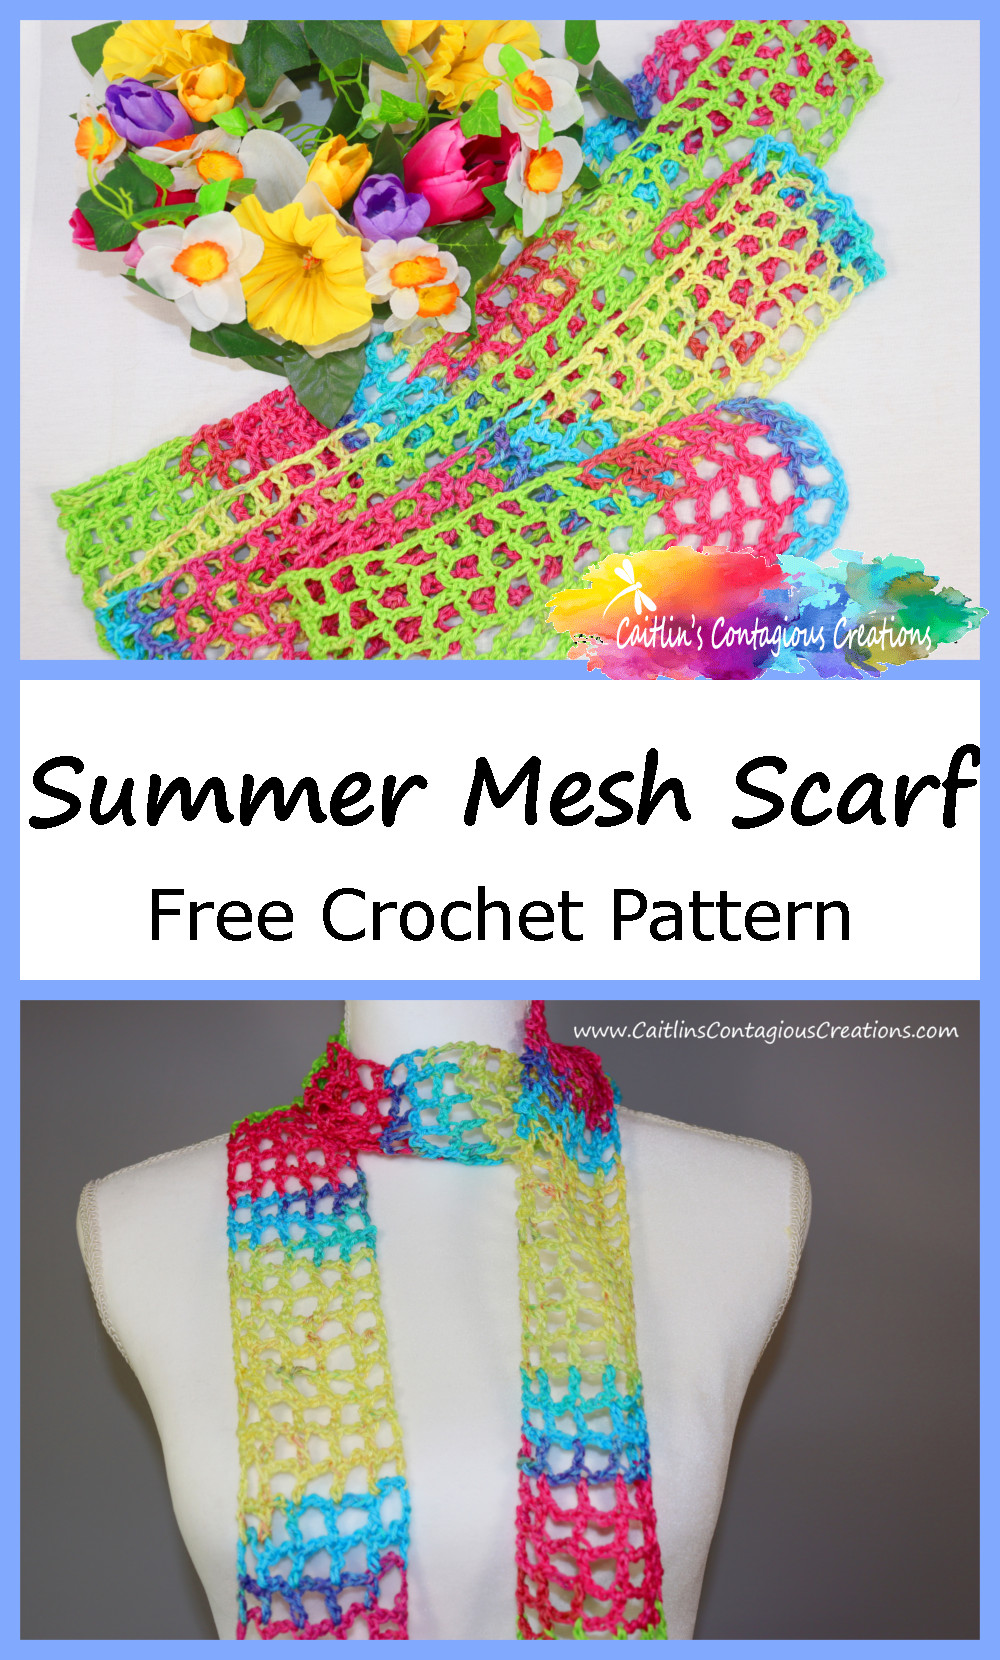 summer scarf crochet pattern stage photos for pinterest image 02